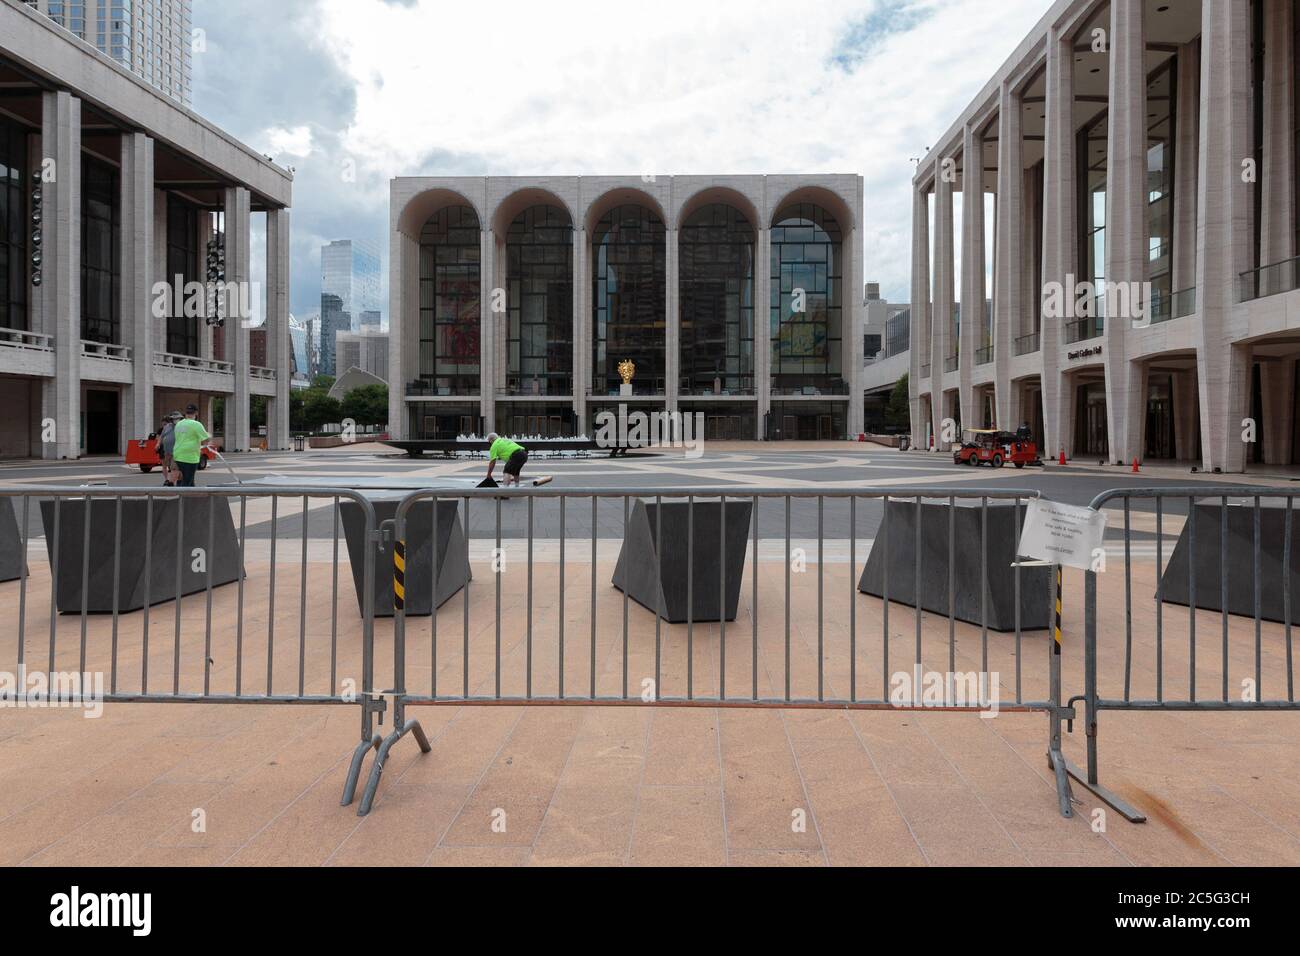 the Metropolitan Opera House, closed due to the coronavirus or covid-19 pandemic, in the distance from behind barriers Stock Photo